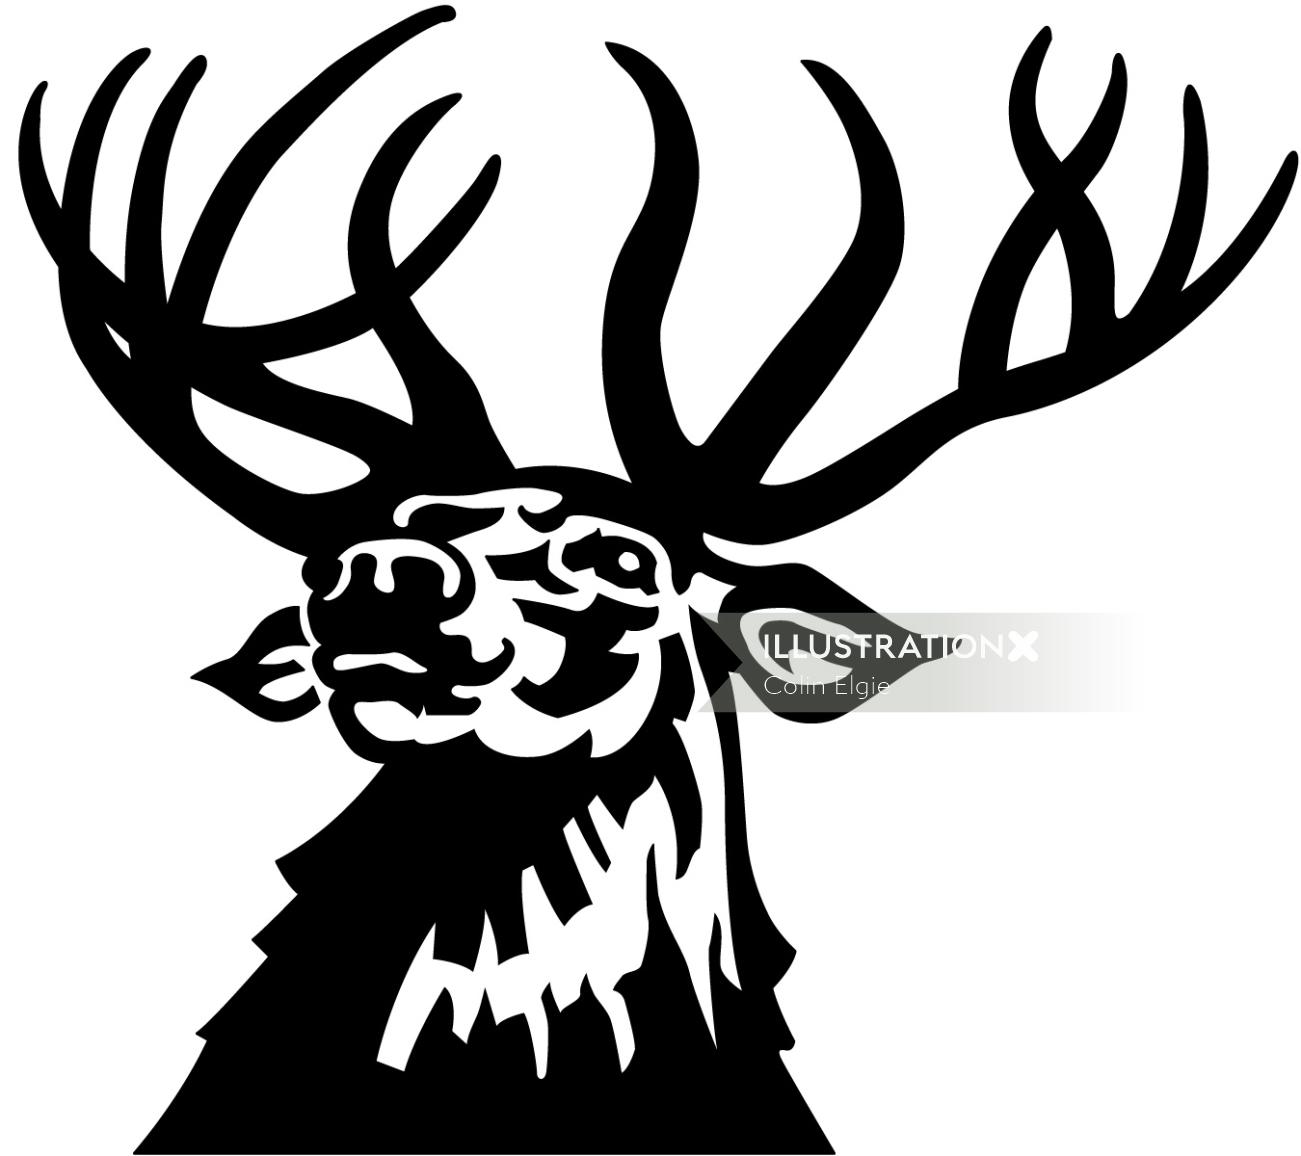 An illustration of black and white stag